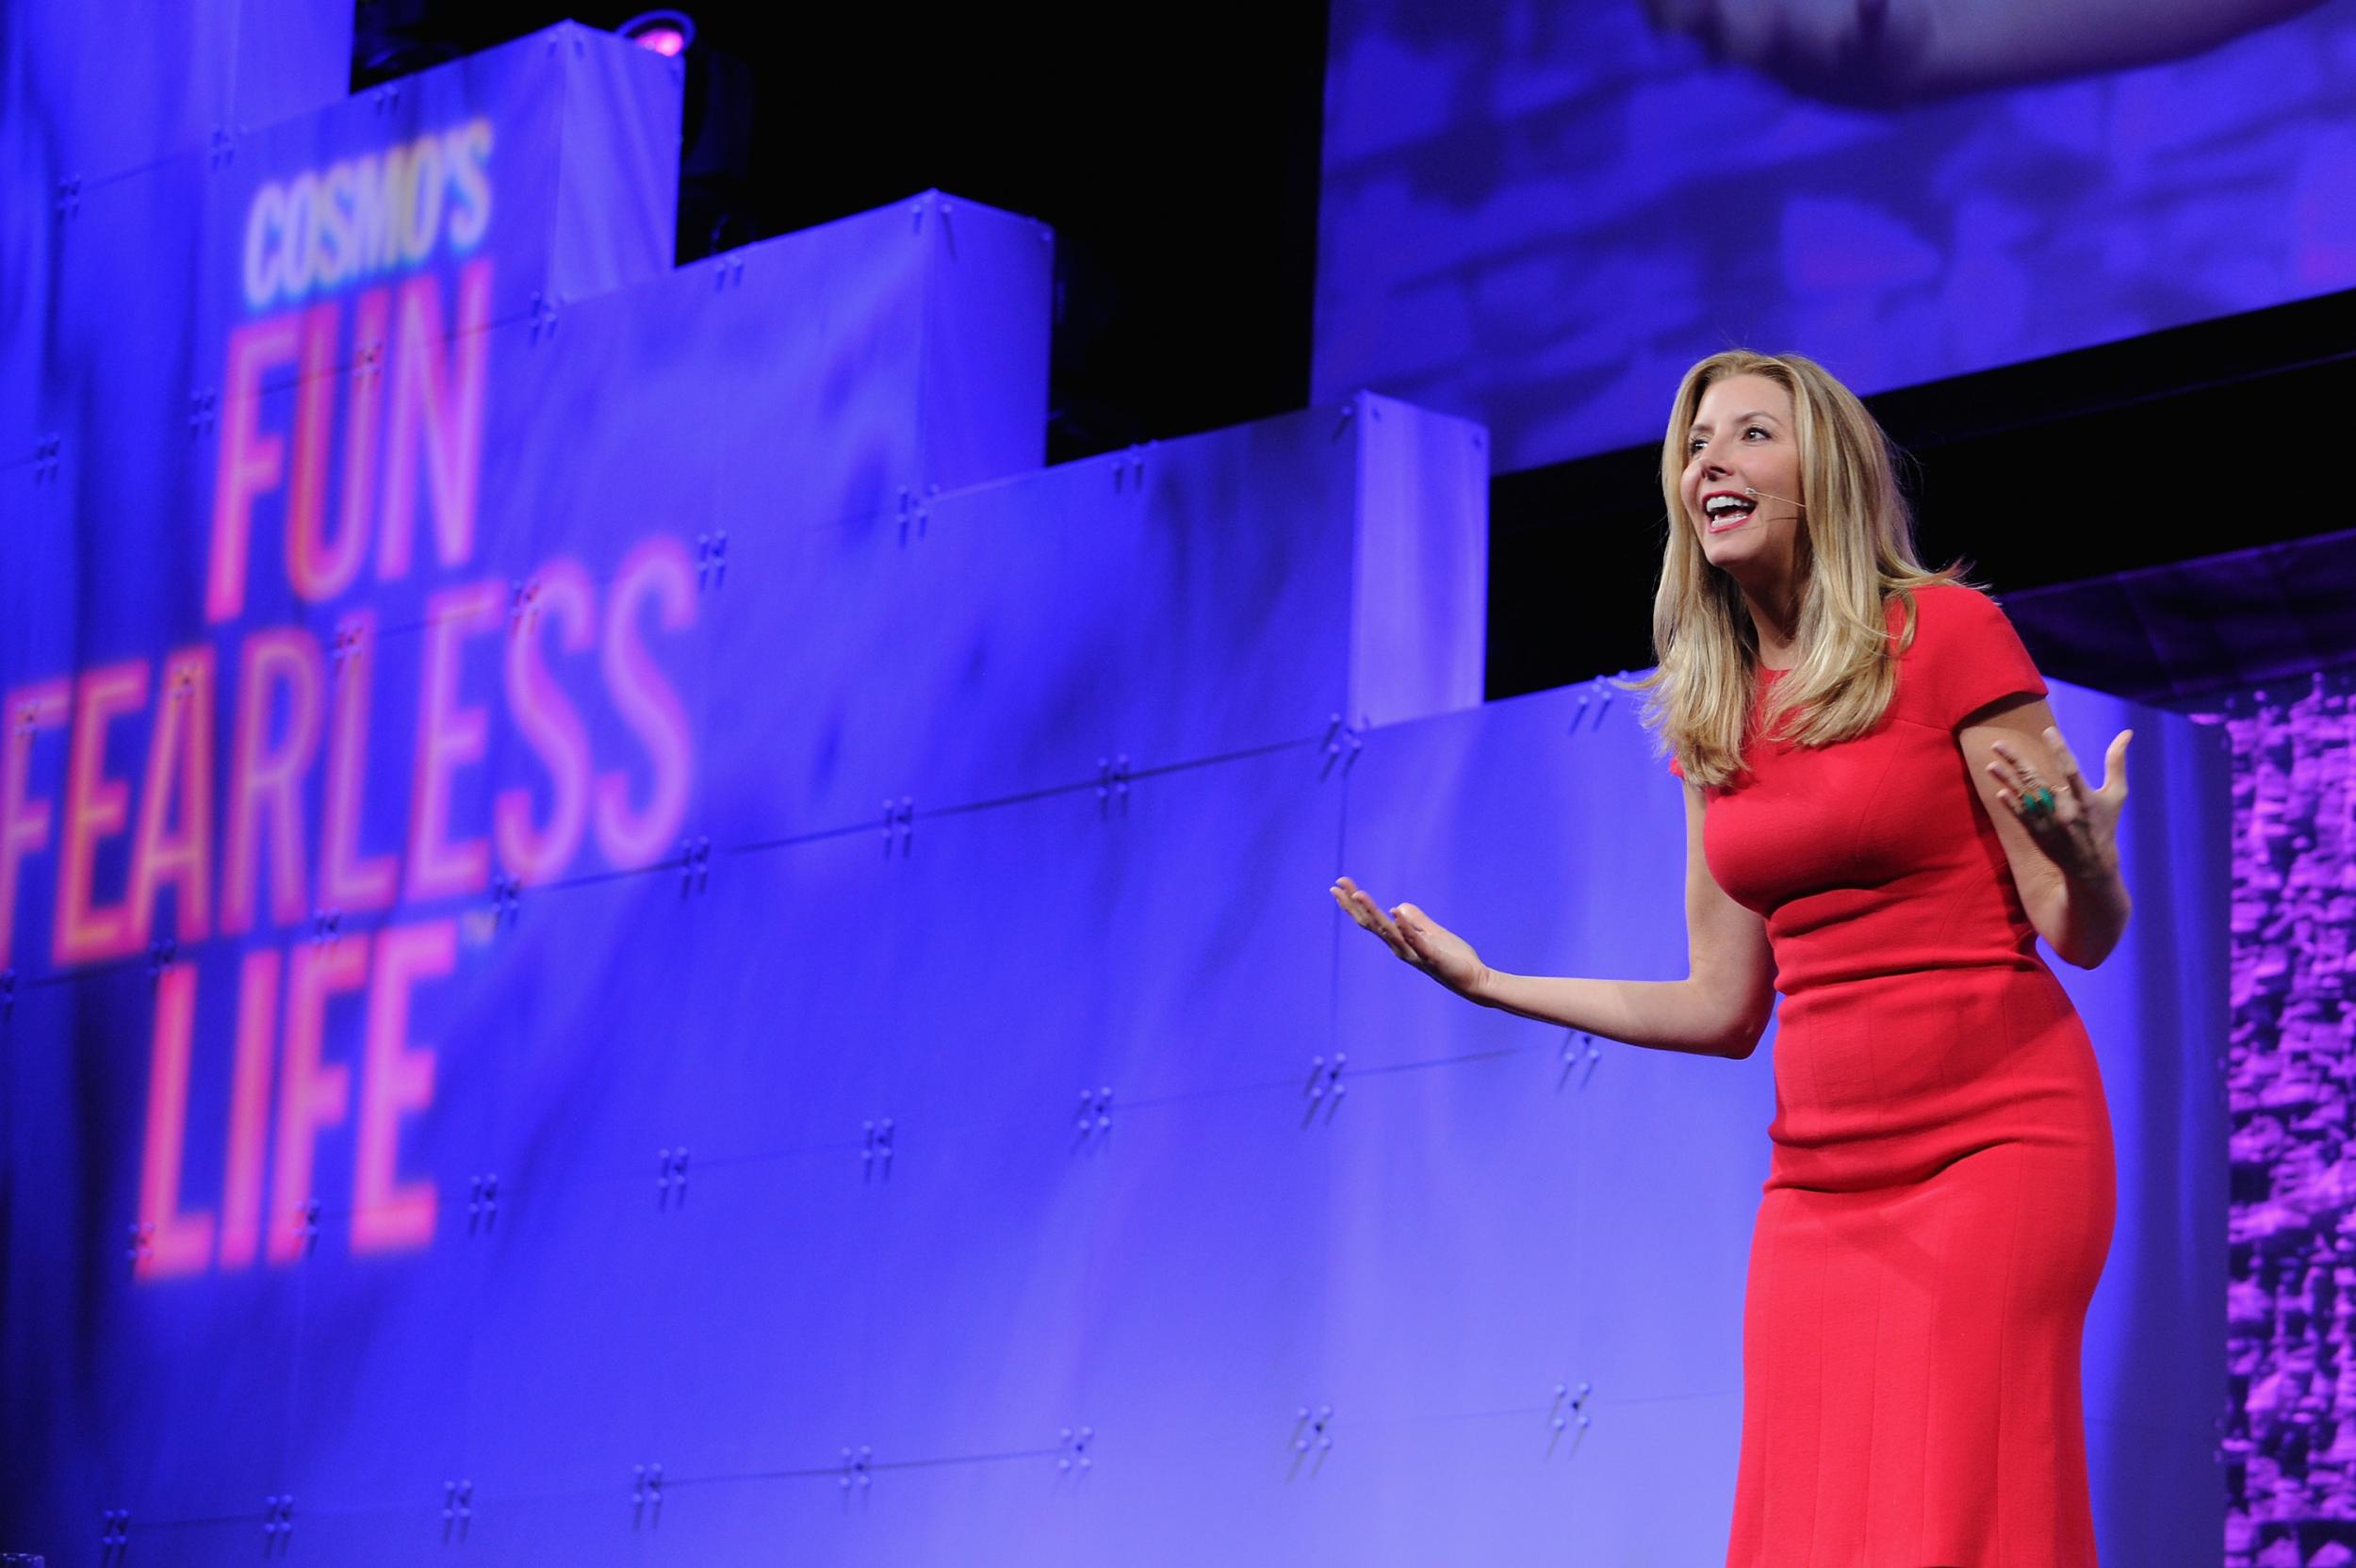 Sara Blakely, Creator of SPANX speaks onstage during Cosmopolitan Magazine's Fun Fearless Life Conference